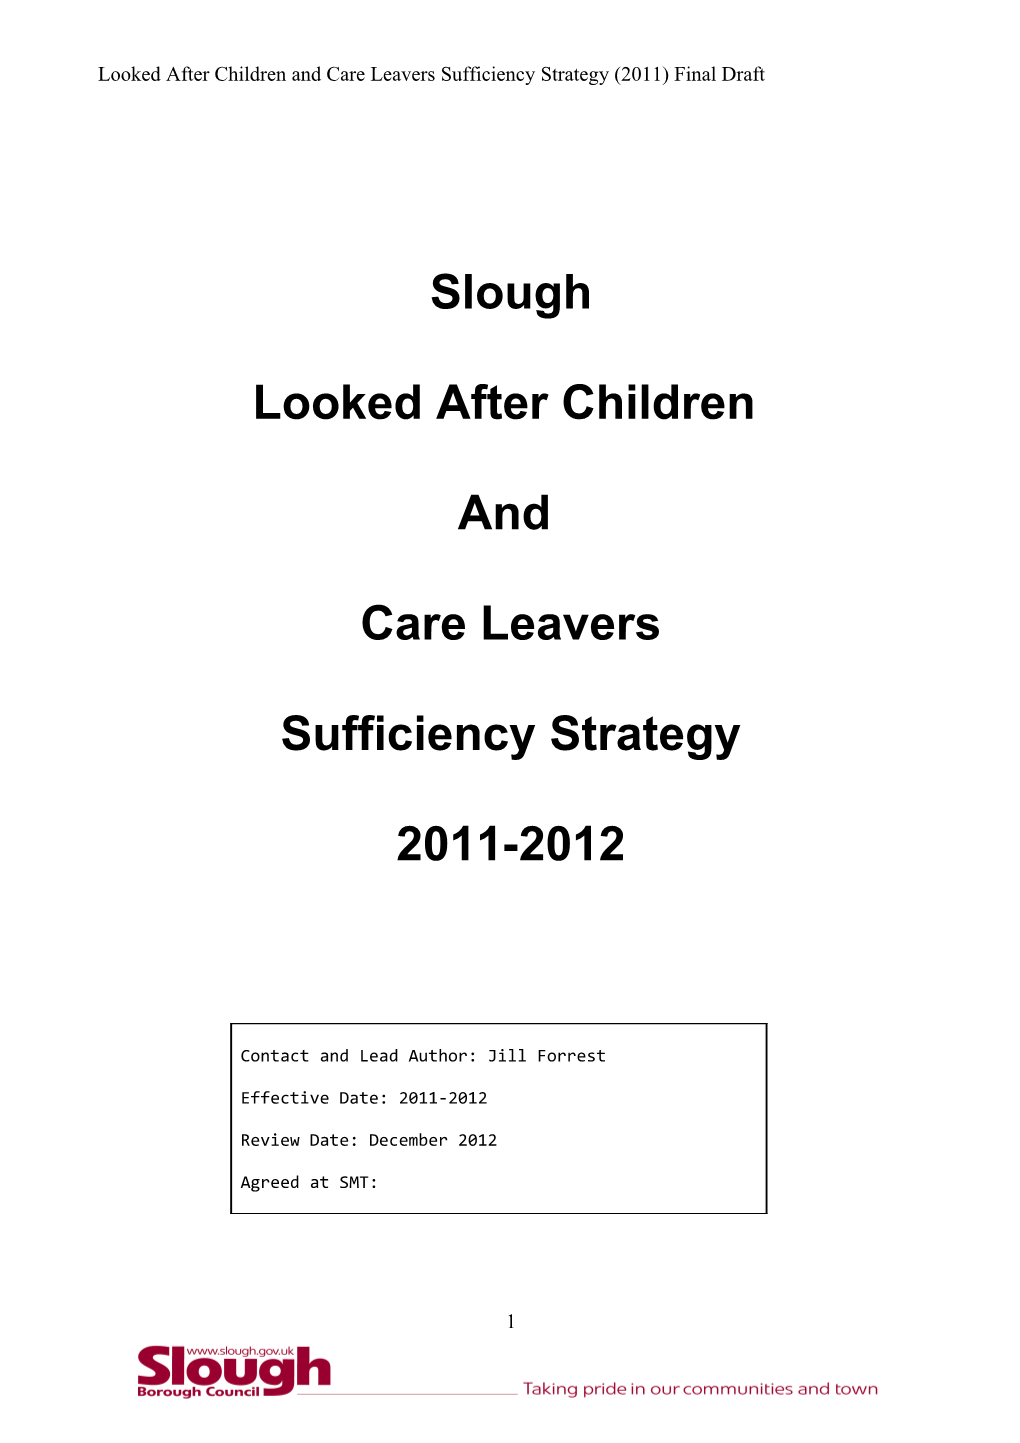 LAC Sufficiency Strategy